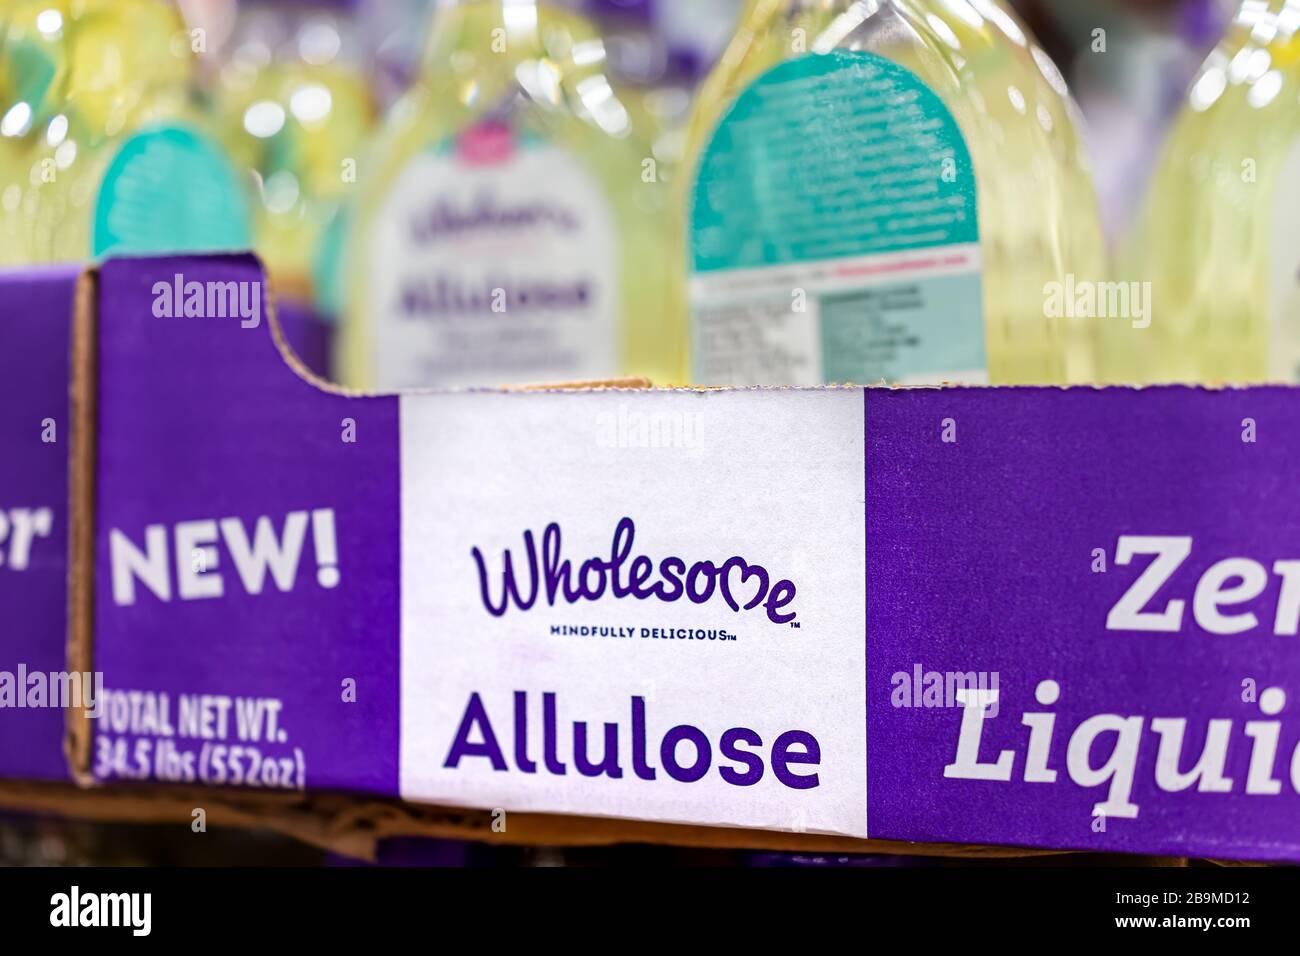 Sterling, USA - March 23, 2020: Costco club store with sign for Allulose sugar free sweetener by Wholesome company as substitute Stock Photo